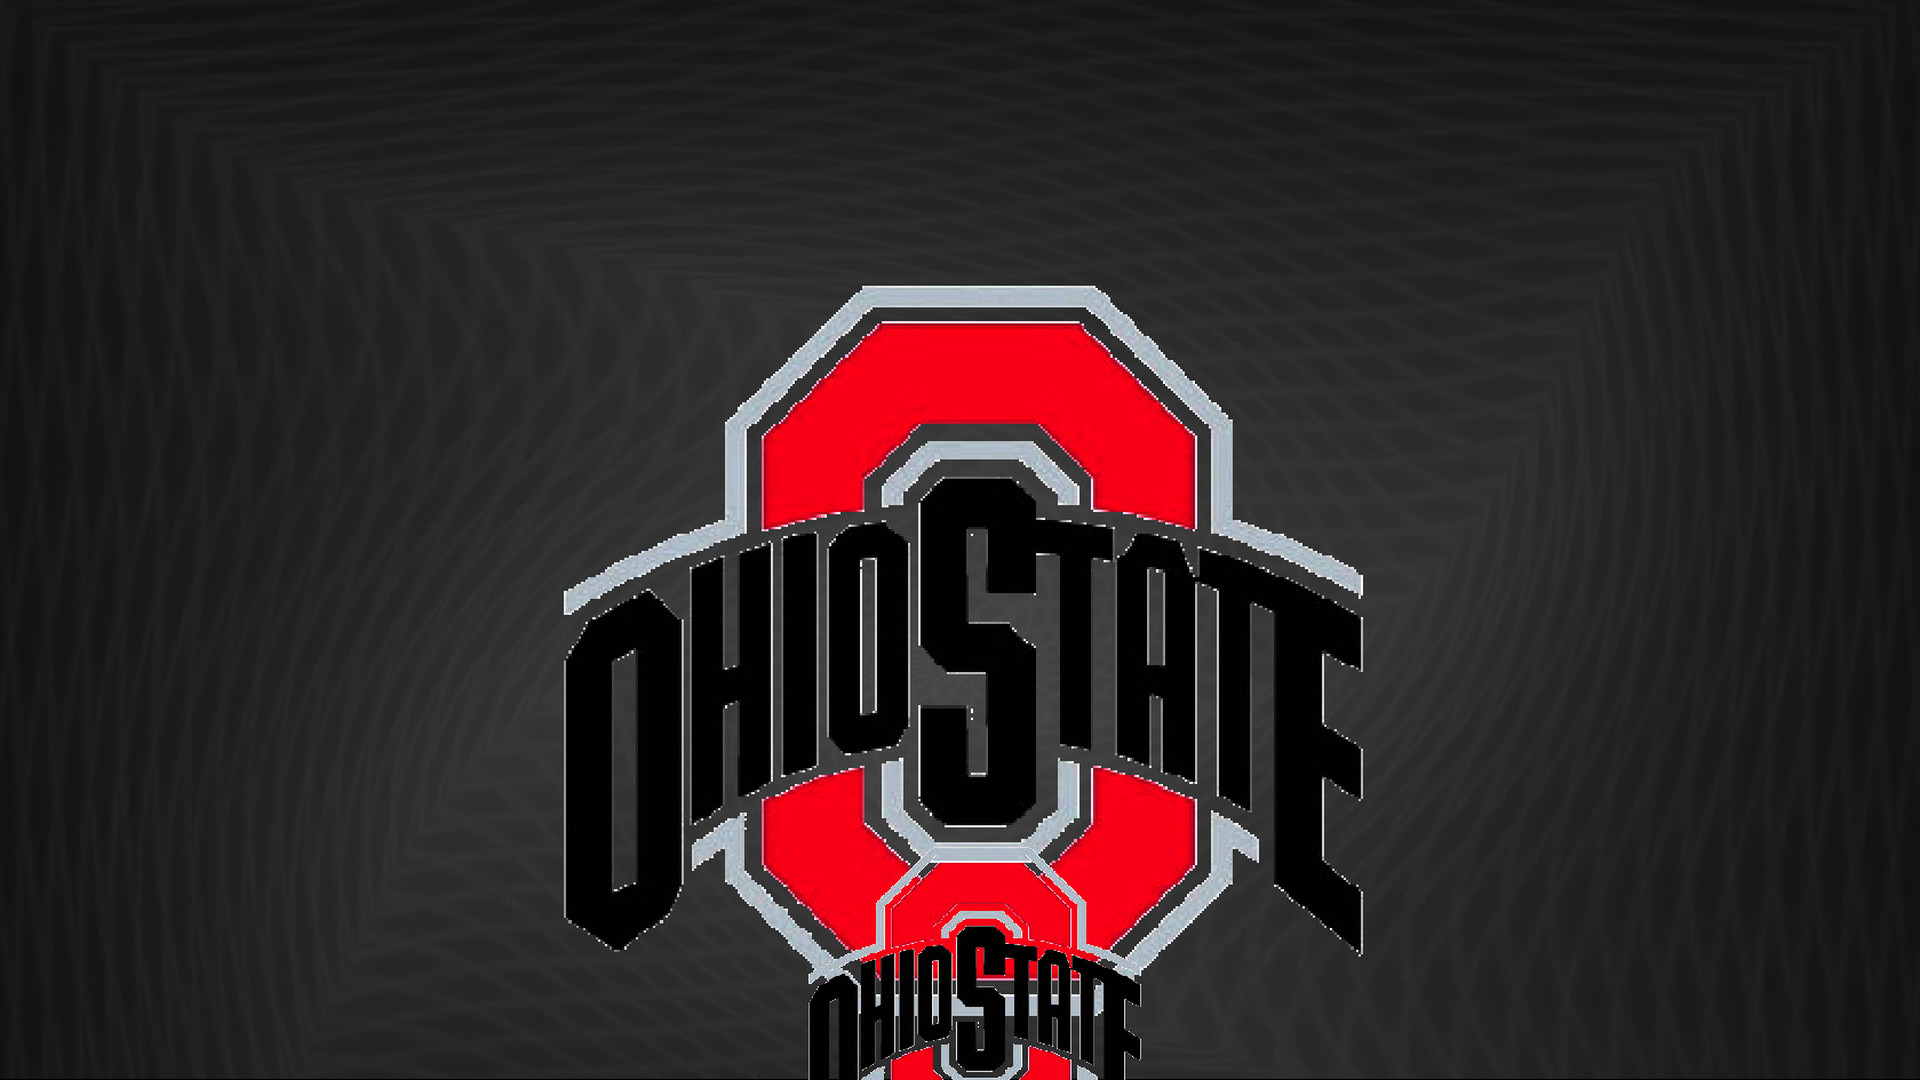 1920x1080 Ohio State Buckeyes images ATHLETIC LOGO #6 HD wallpaper and background  photos